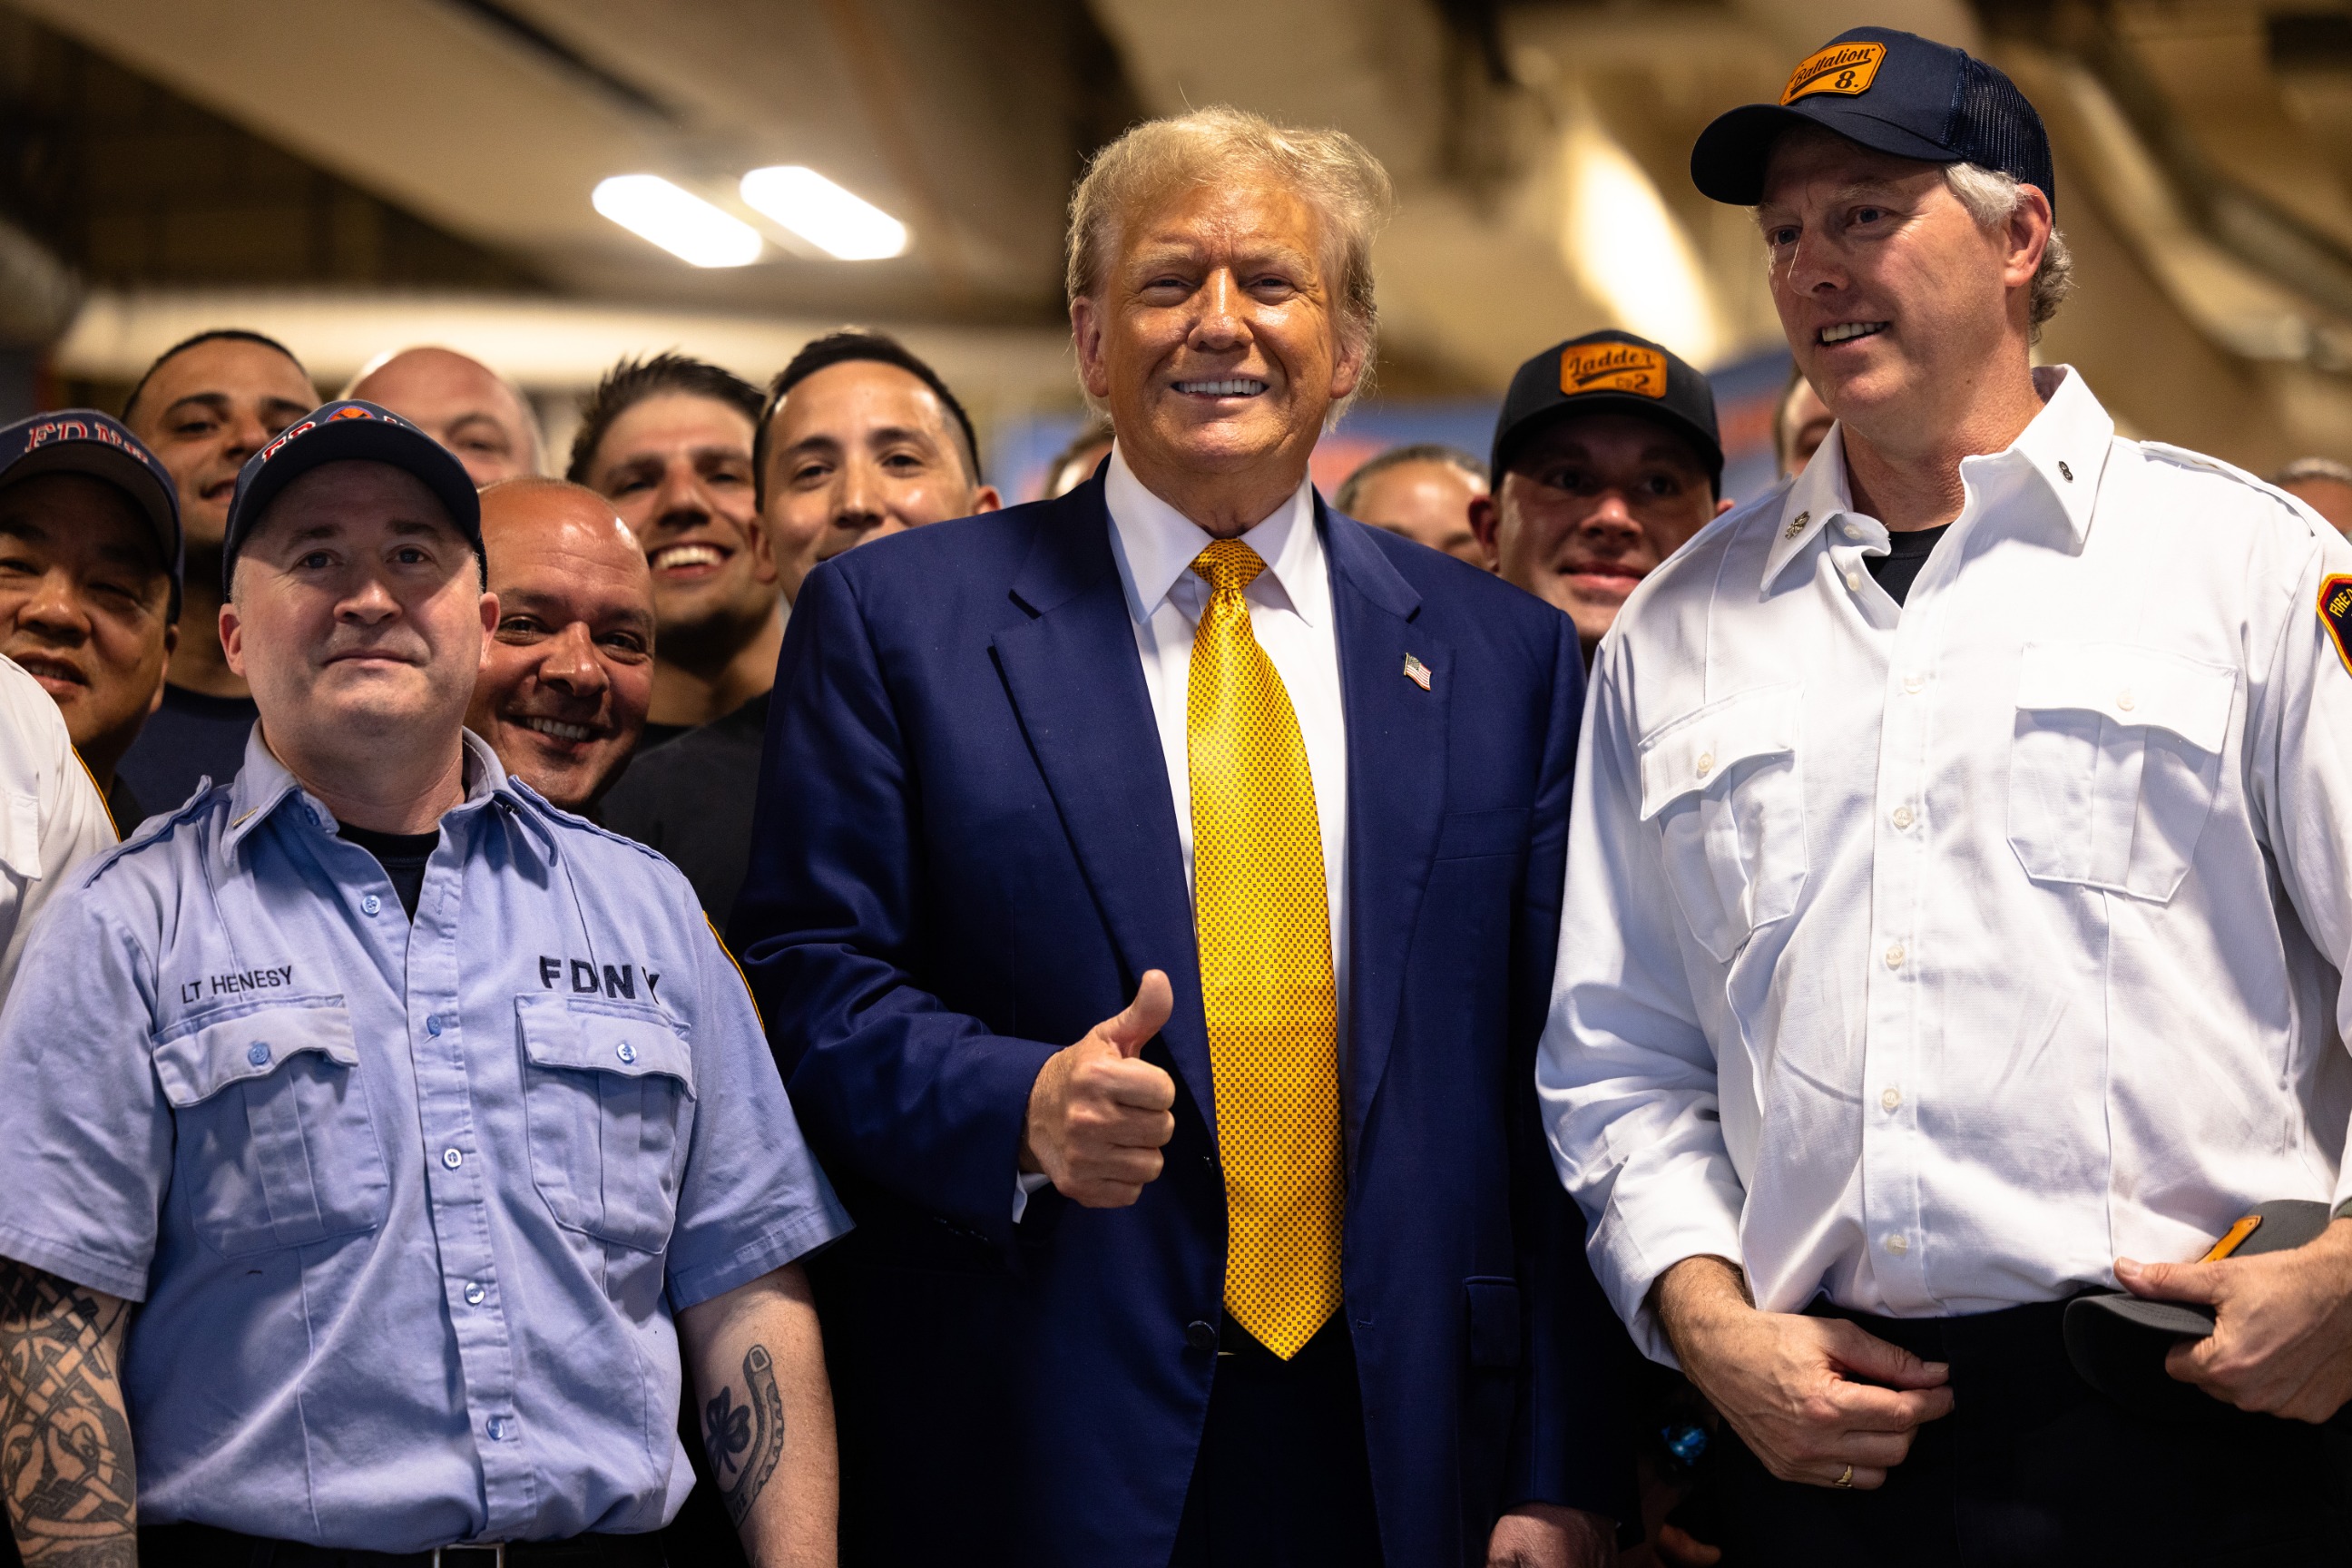 PHOTO: Republican presidential candidate and former U.S. President Donald Trump poses for photos with members of the FDNY Engine 2, Battalion 8 firehouse, May 2, 2024, in New York.